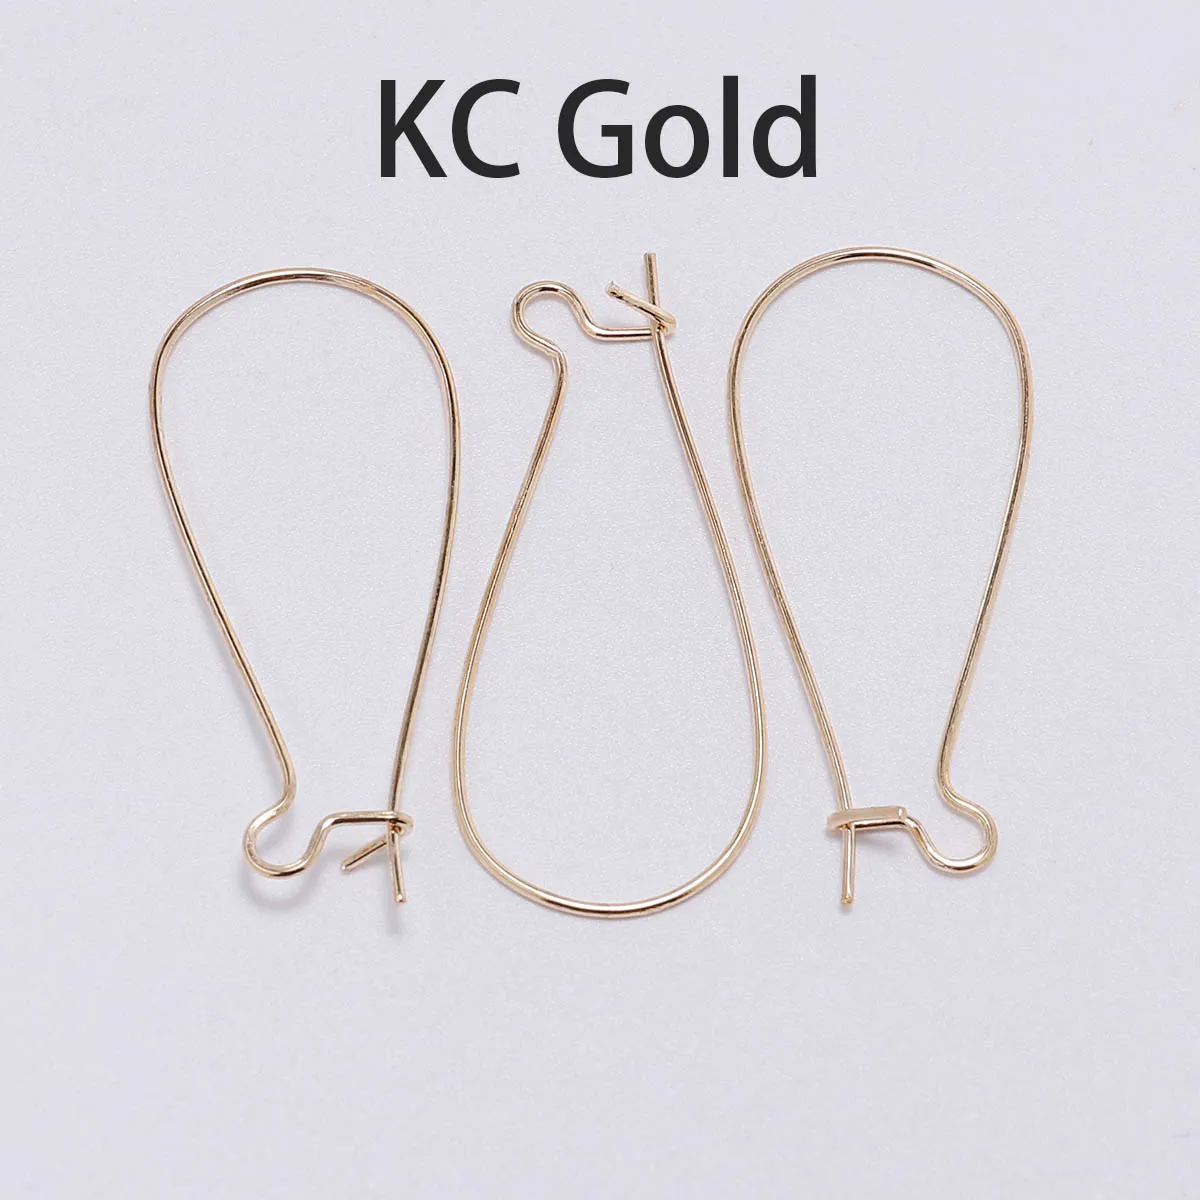 Buy 20x Bronze Kidney Earring Hooks With Clasps, 24mm Bronze Tone Earring  Wires, Earring Findings, Earring Components C859 Online in India - Etsy